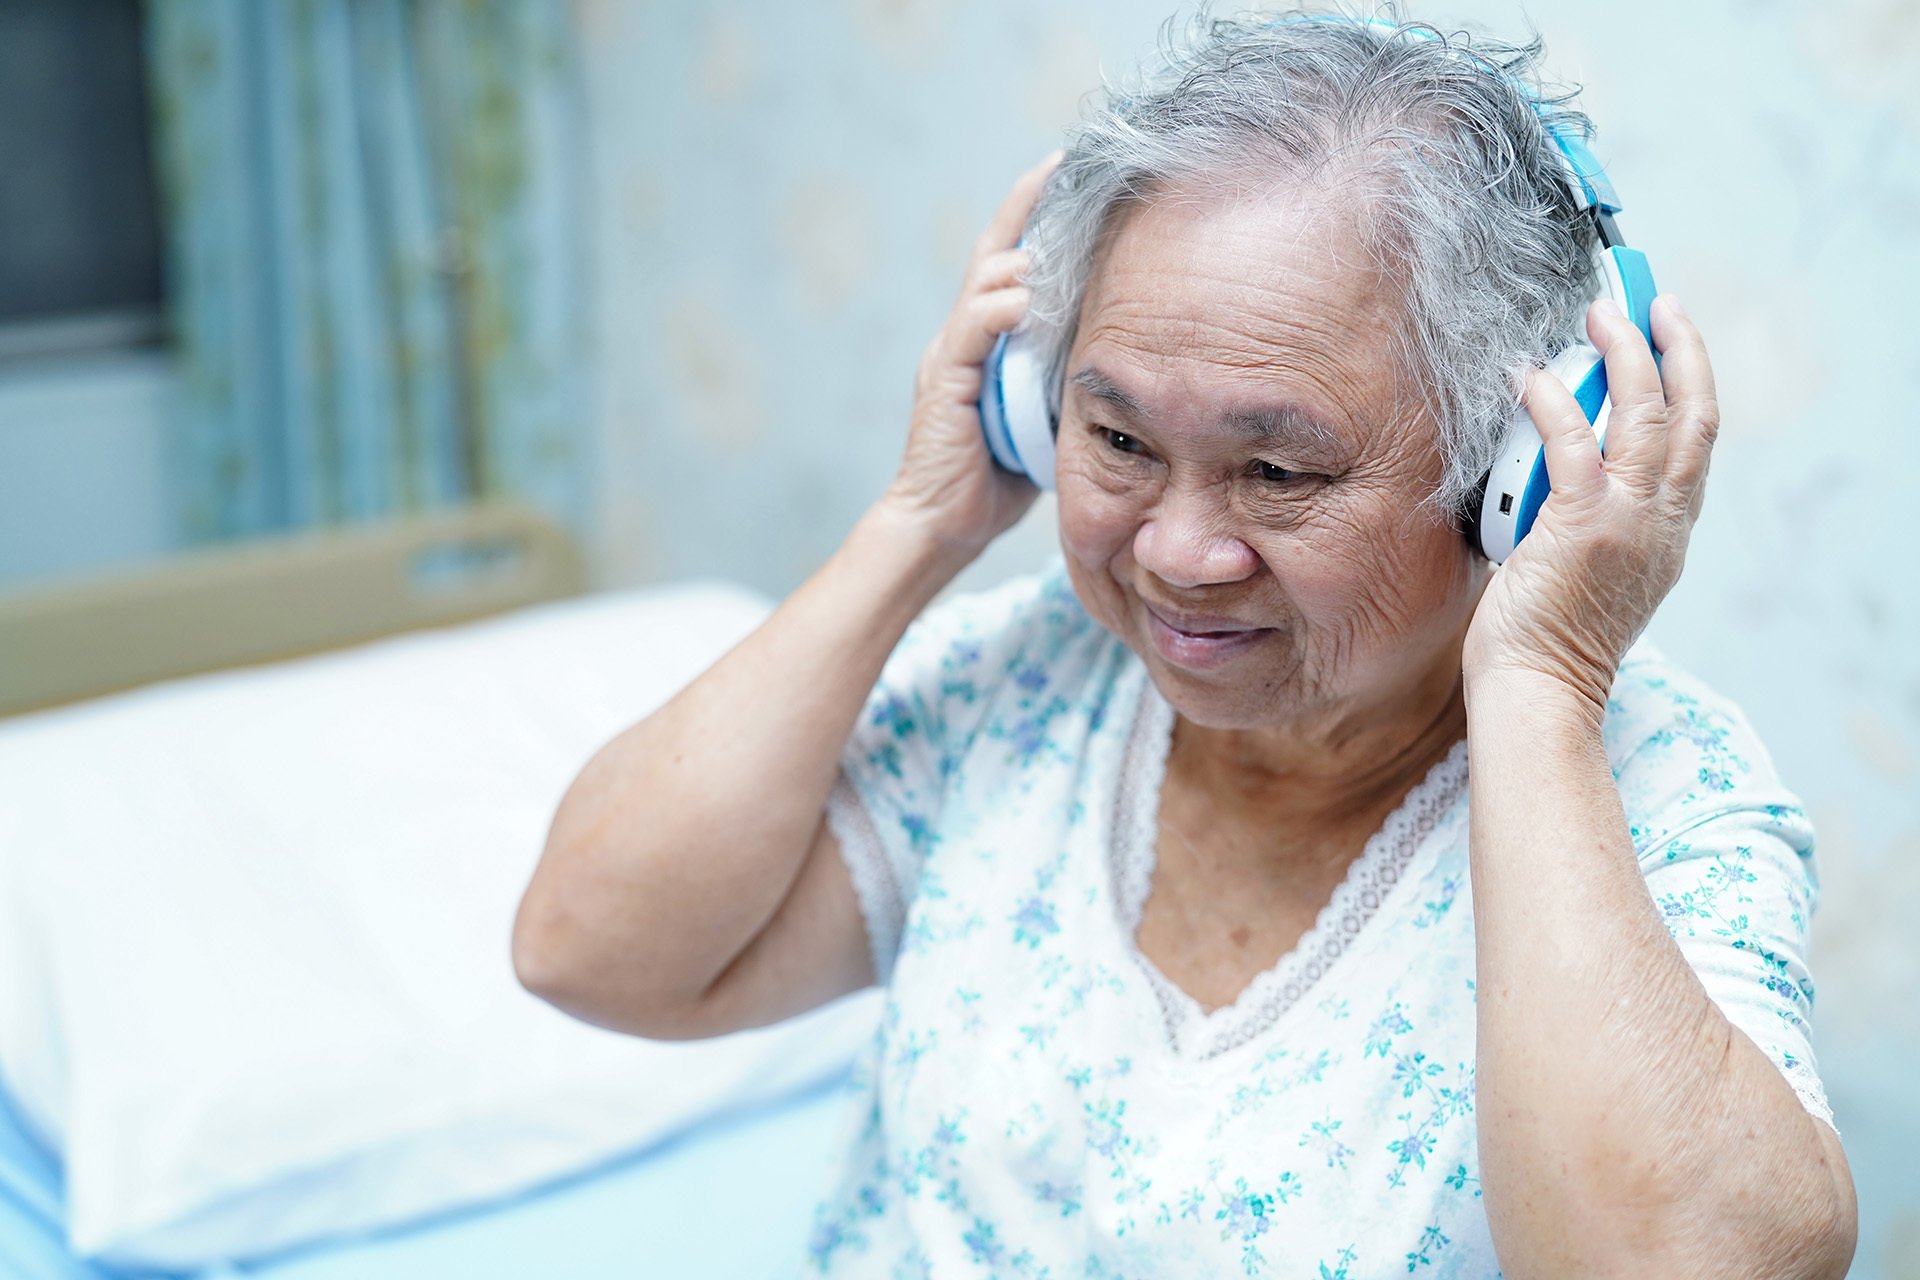 Harmonious Healing: How Music Improves the Lives of Dementia Patients